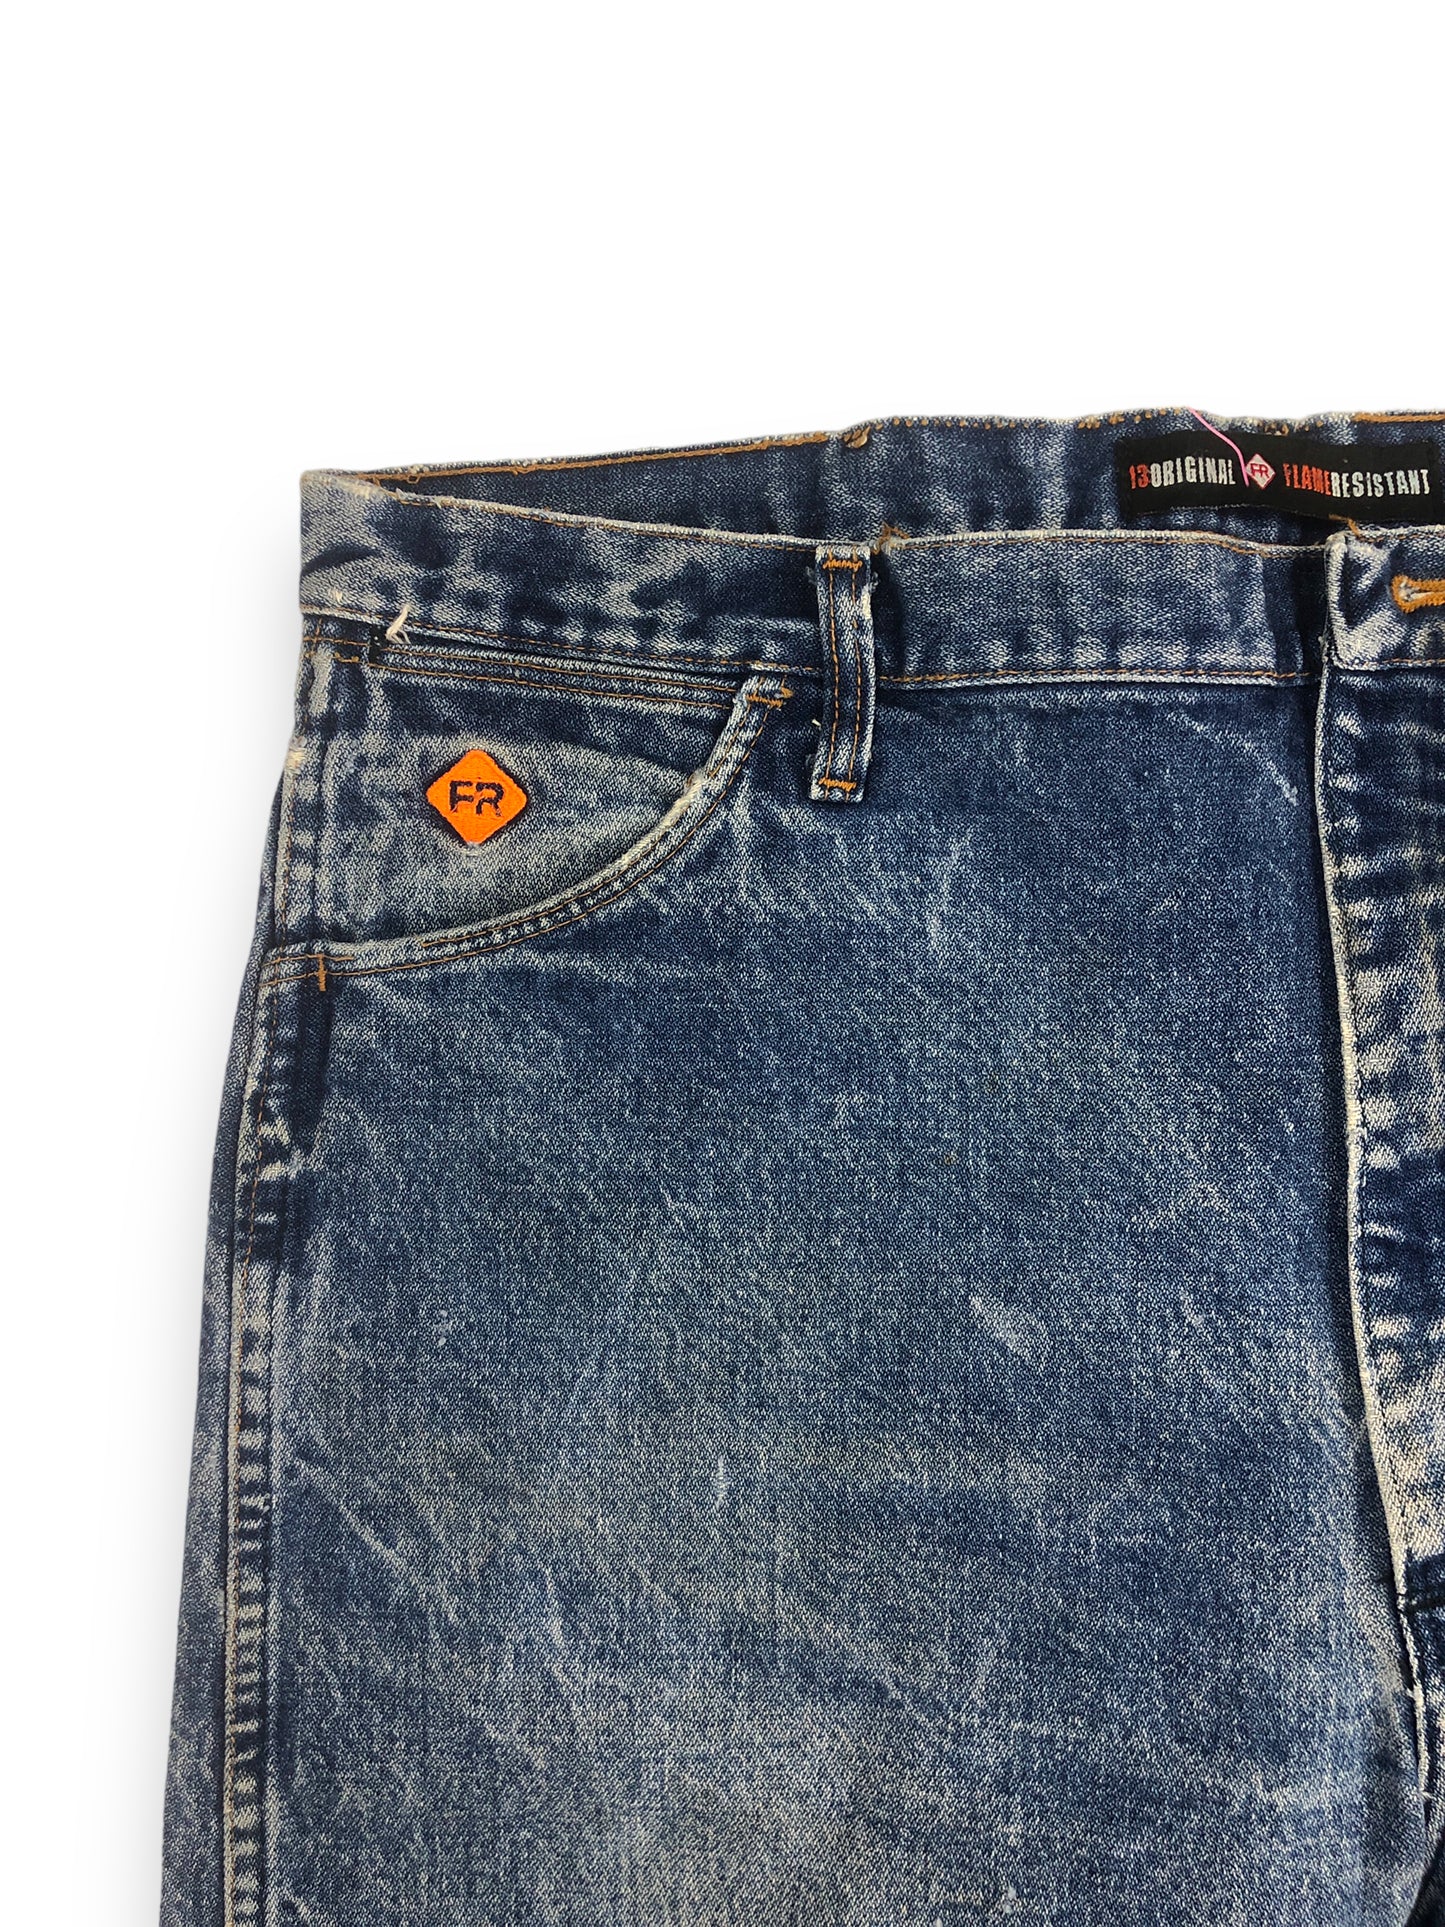 Lee Fireresistance Baggy Jeans